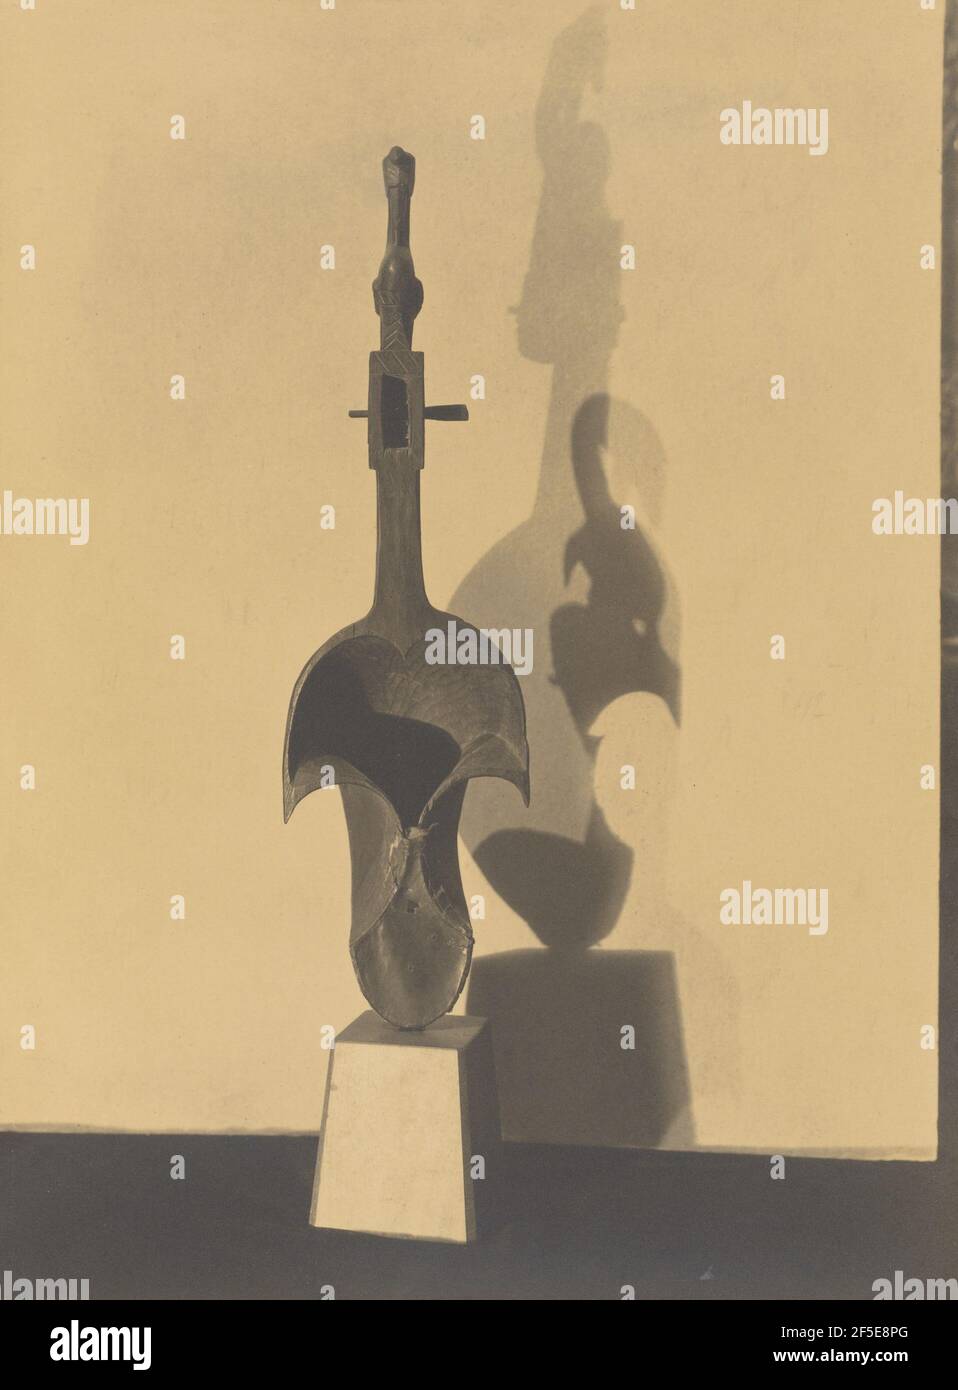 African Musical Instrument. Charles Sheeler (American, 1883 - 1965) Stock Photo